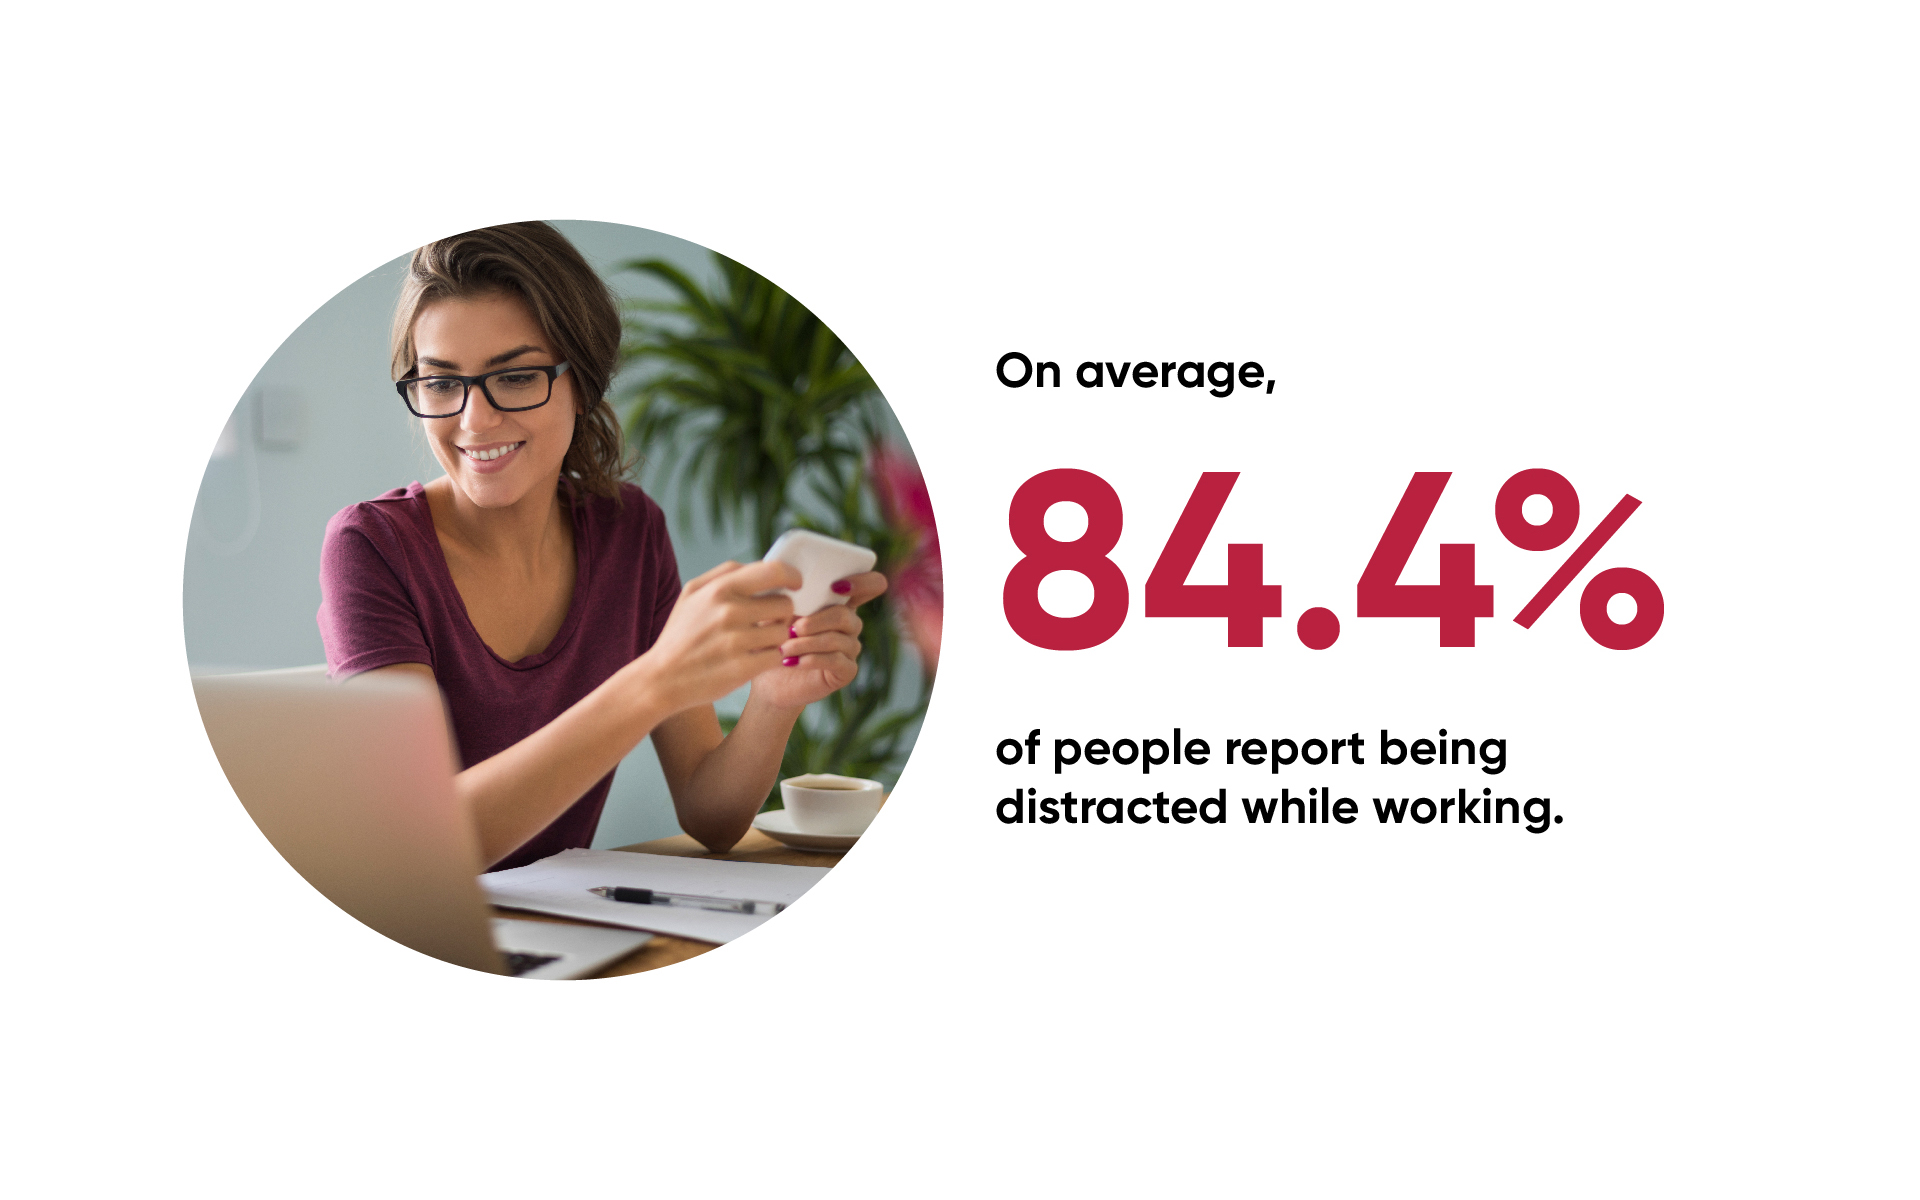 On average, 84.4% of people report being distracted while working